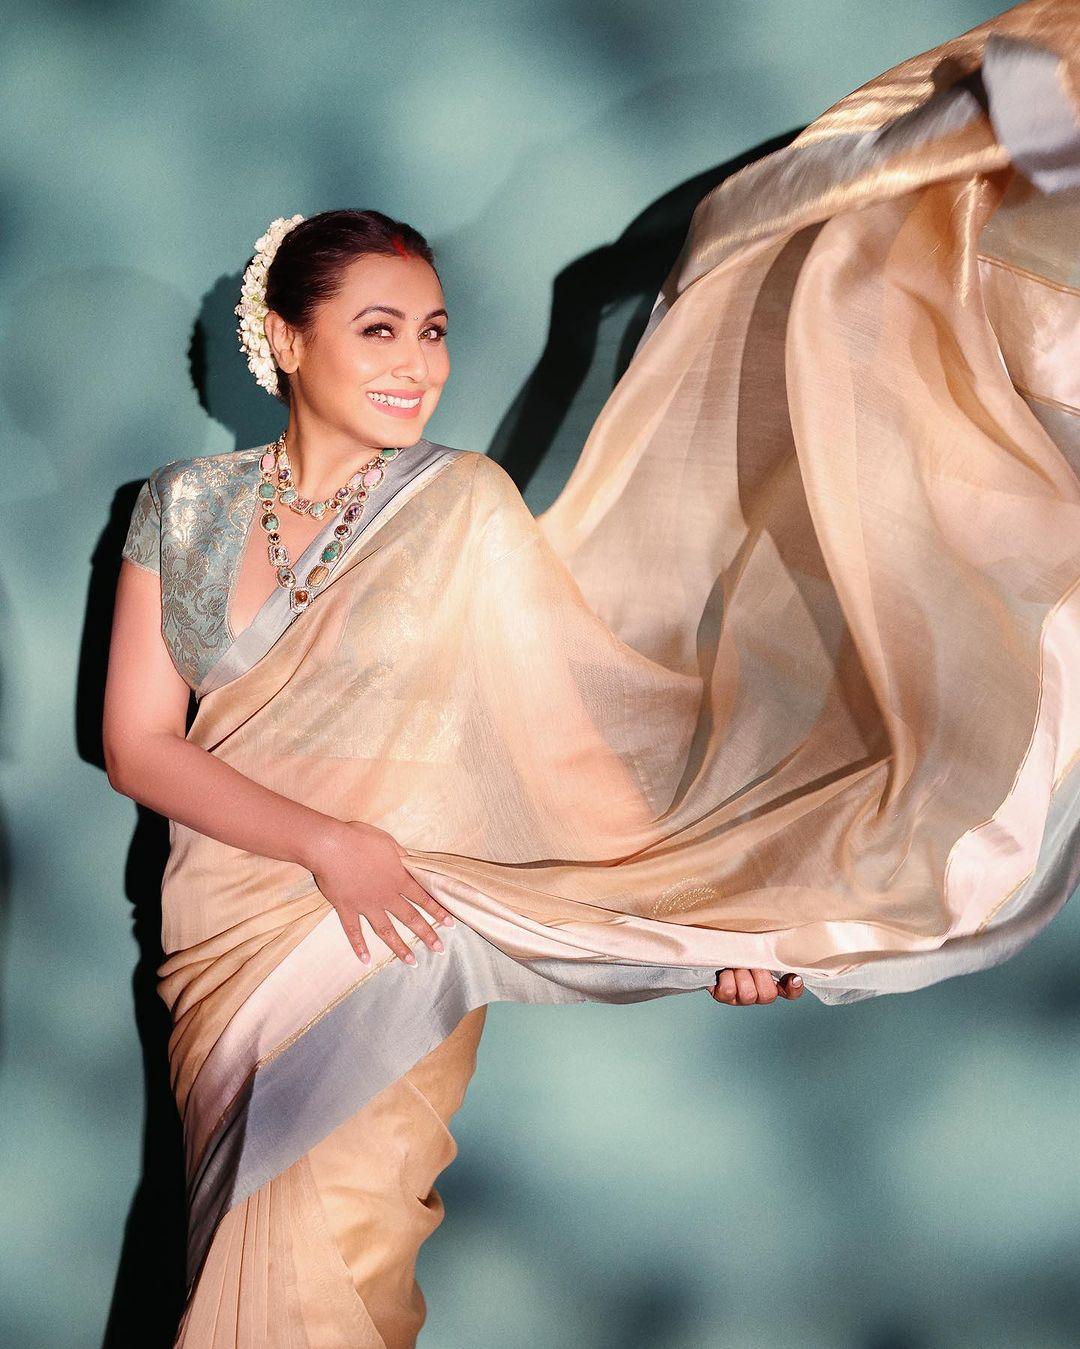 No matter what look she sports, Rani always accessories with her 1000-watt smile, that makes her stand out in a crowd